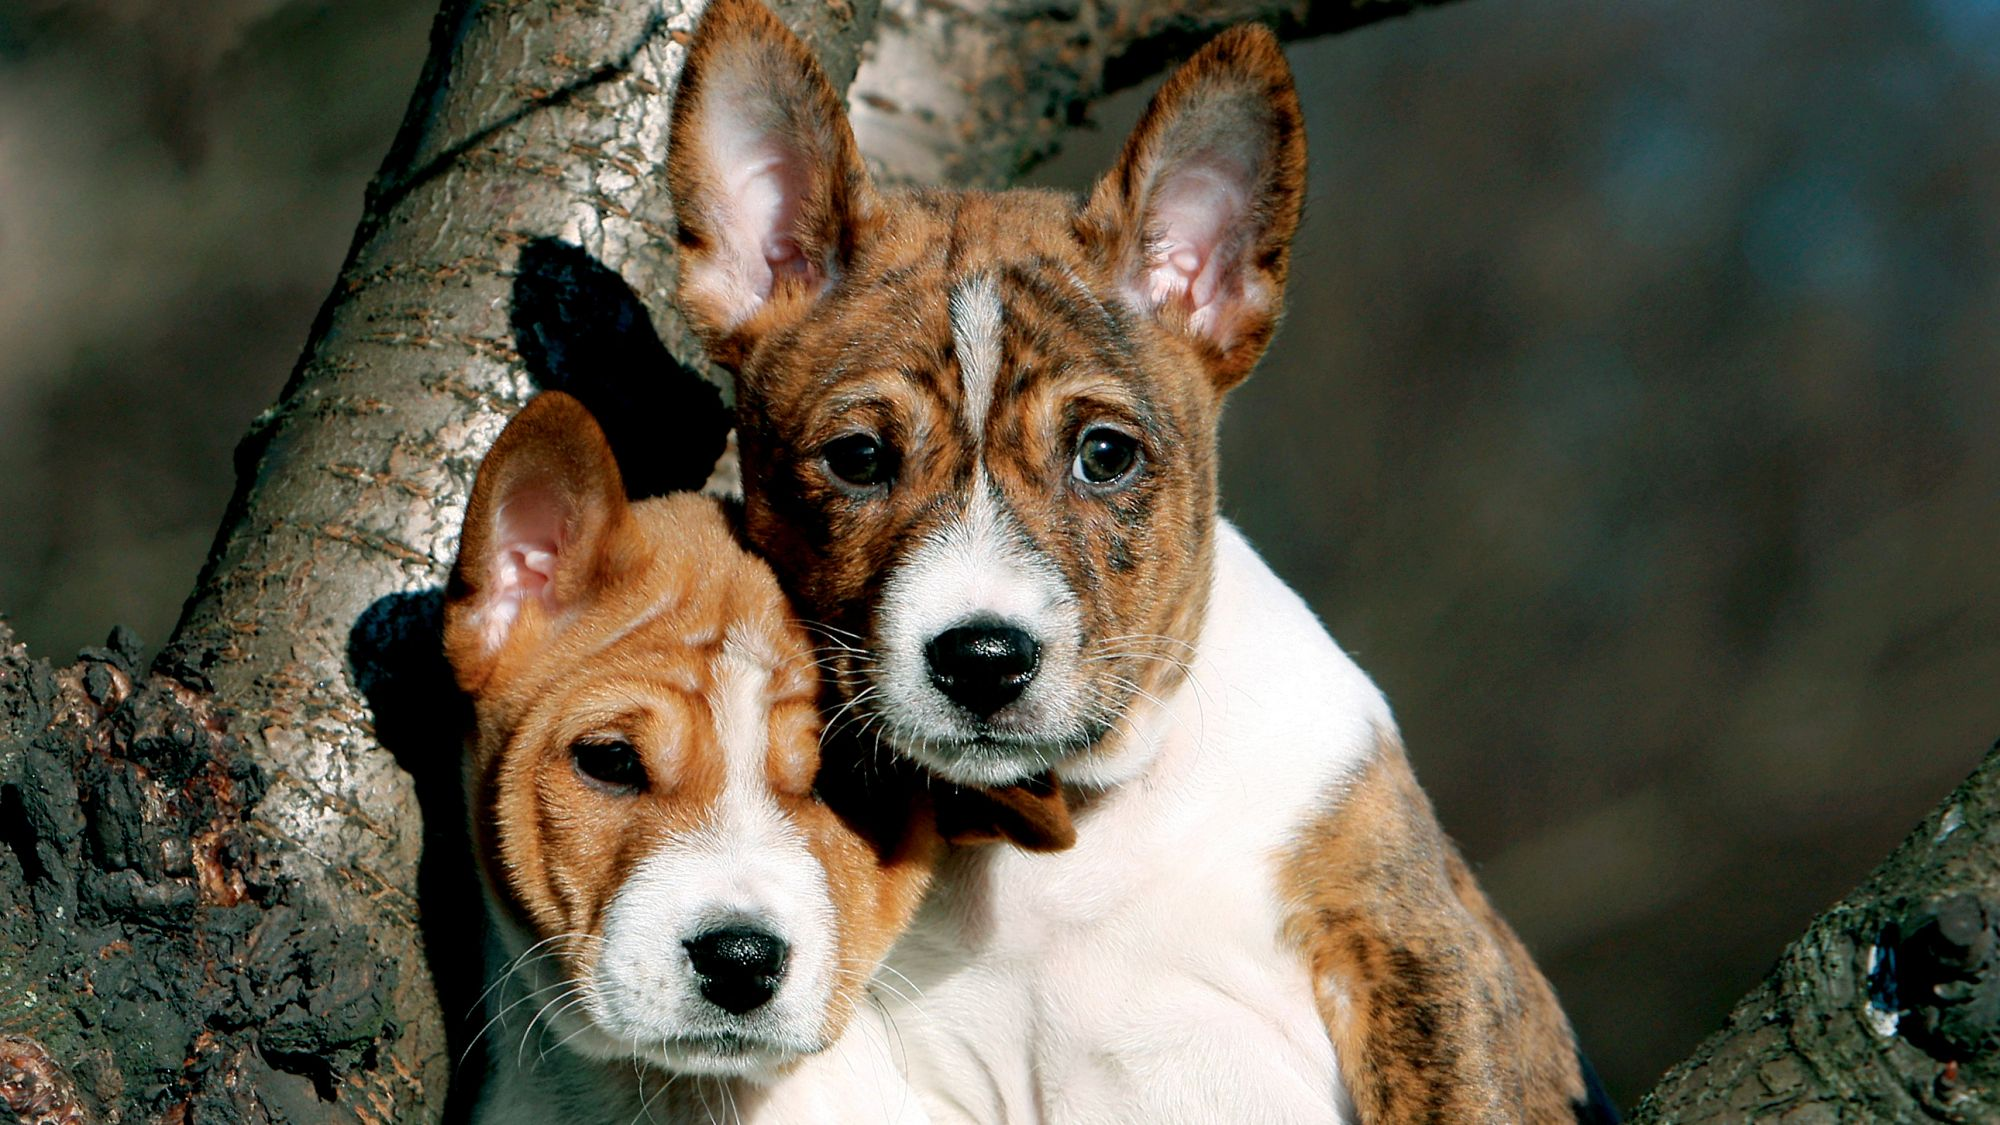 Two Basenji dogs, one adult and one puppy, sat in a tree